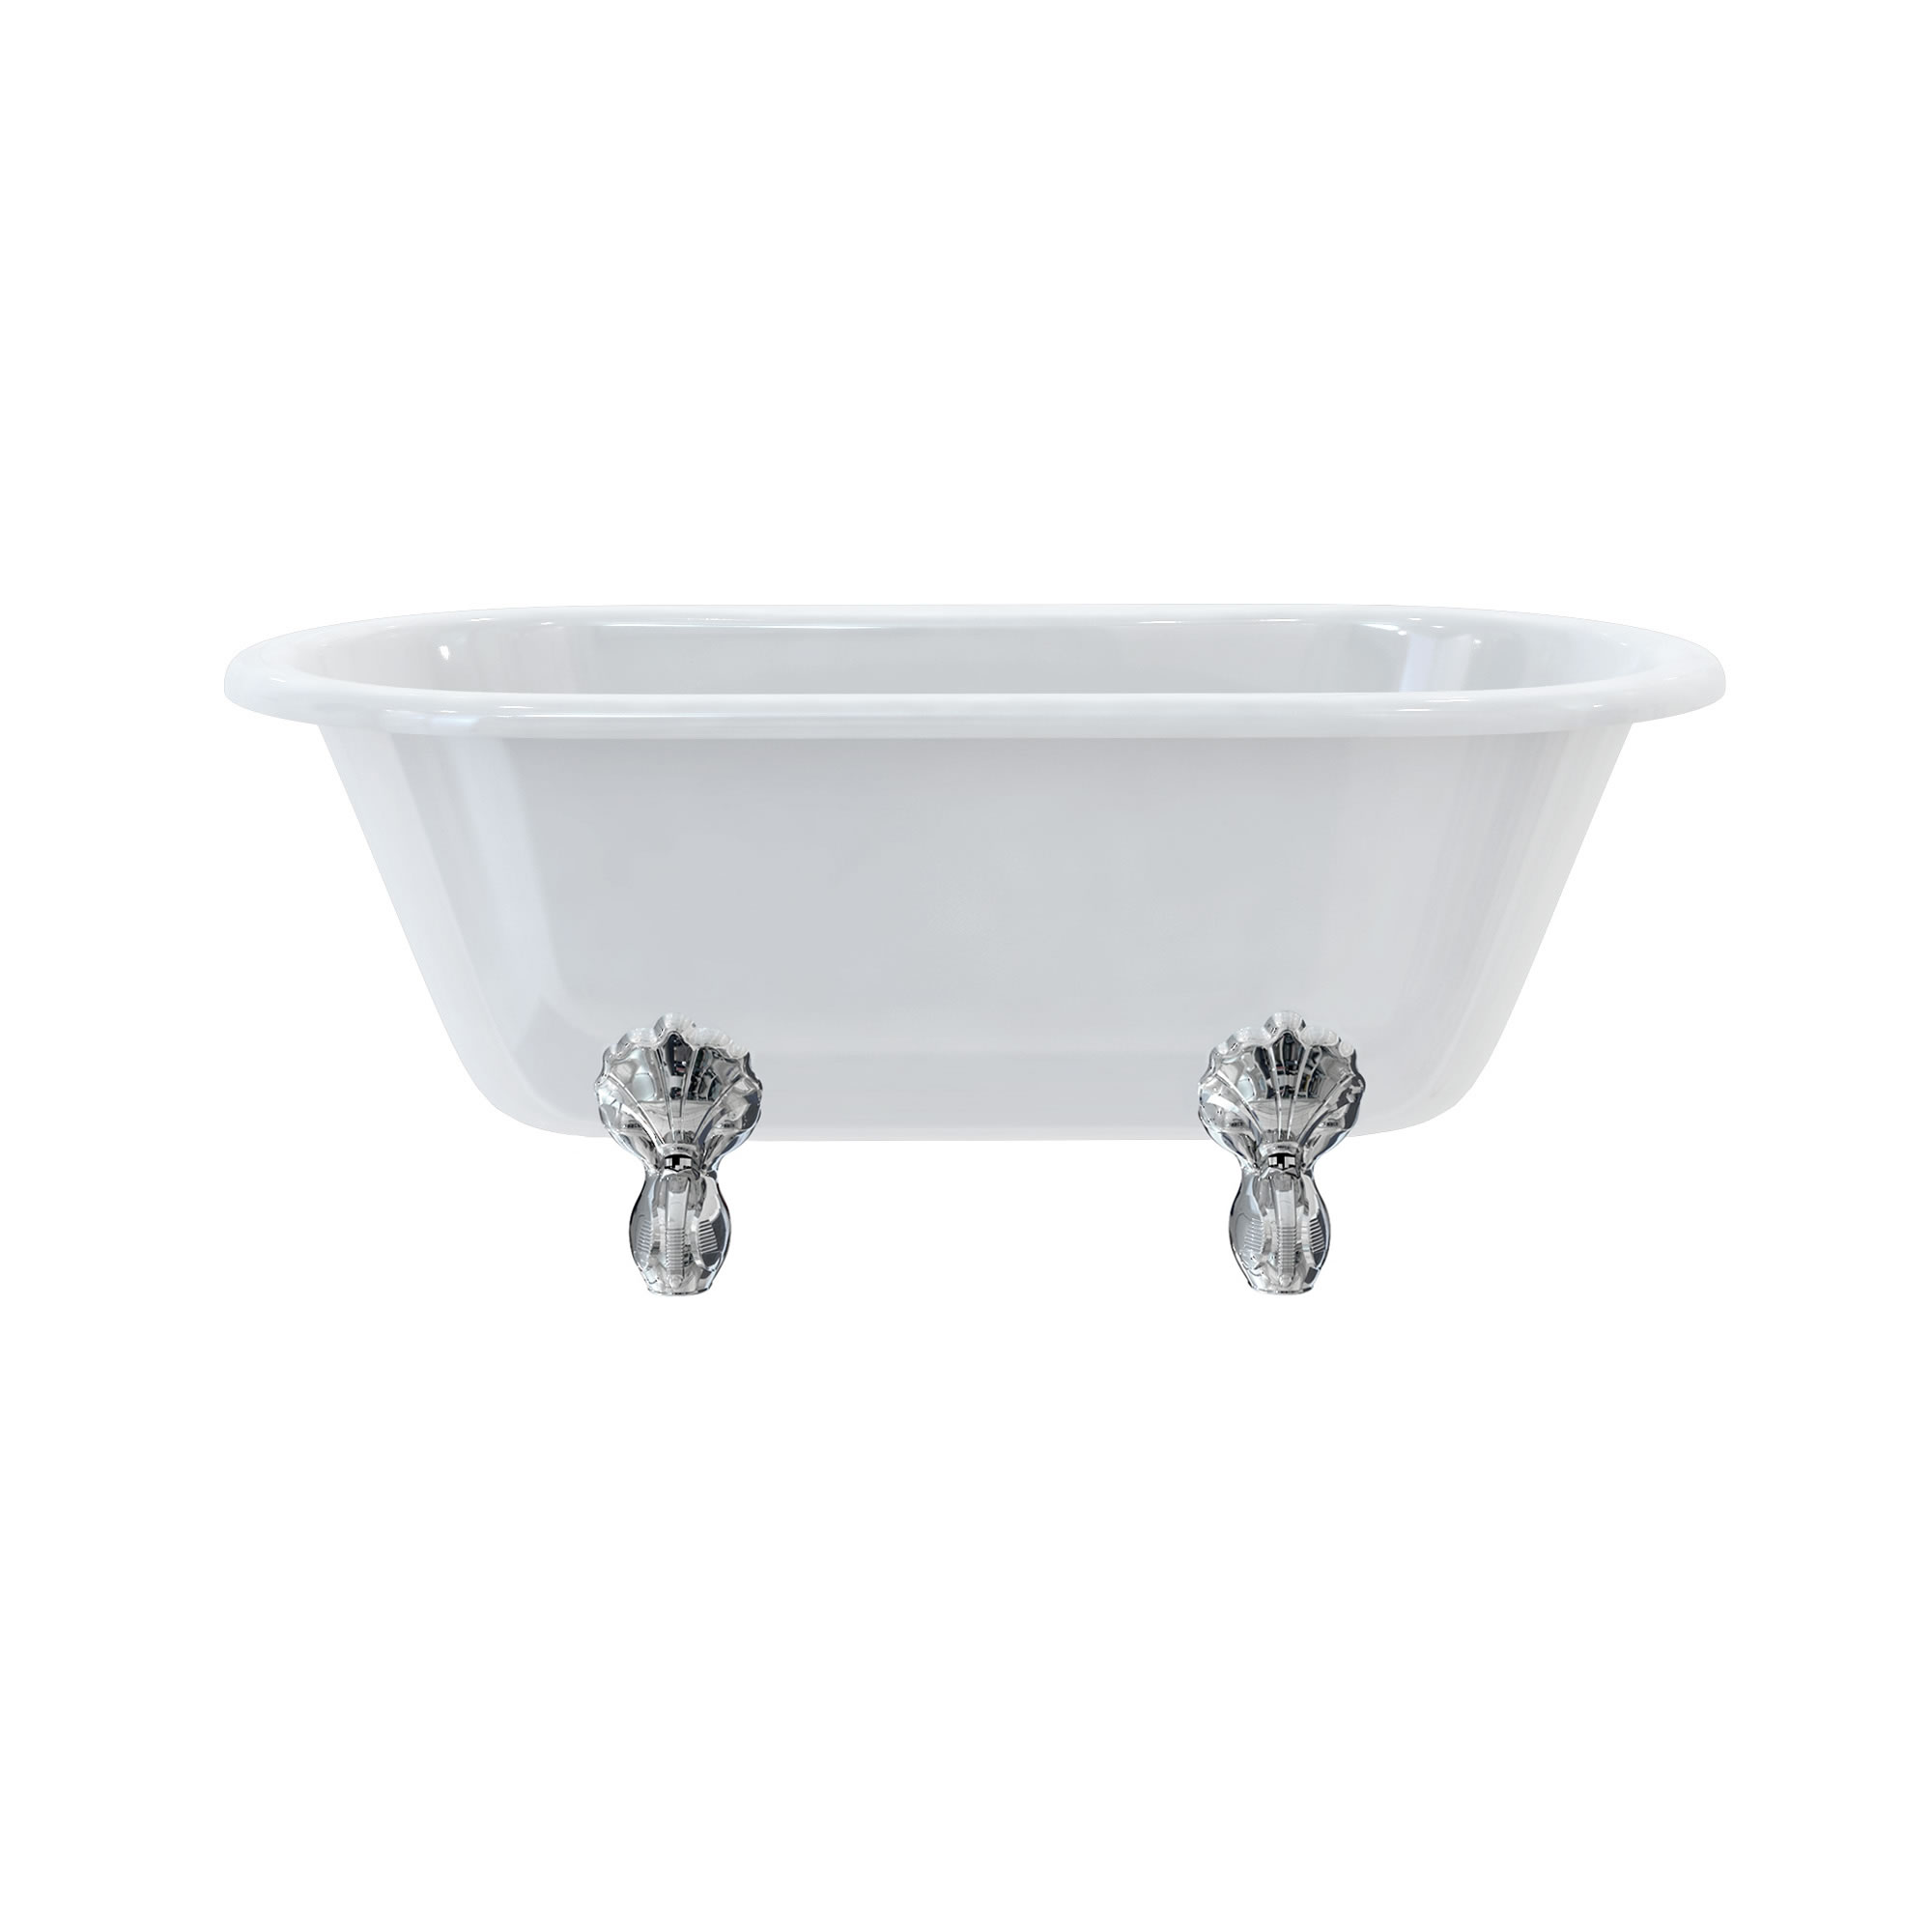 Windsor double ended 150cm bath with luxury legs